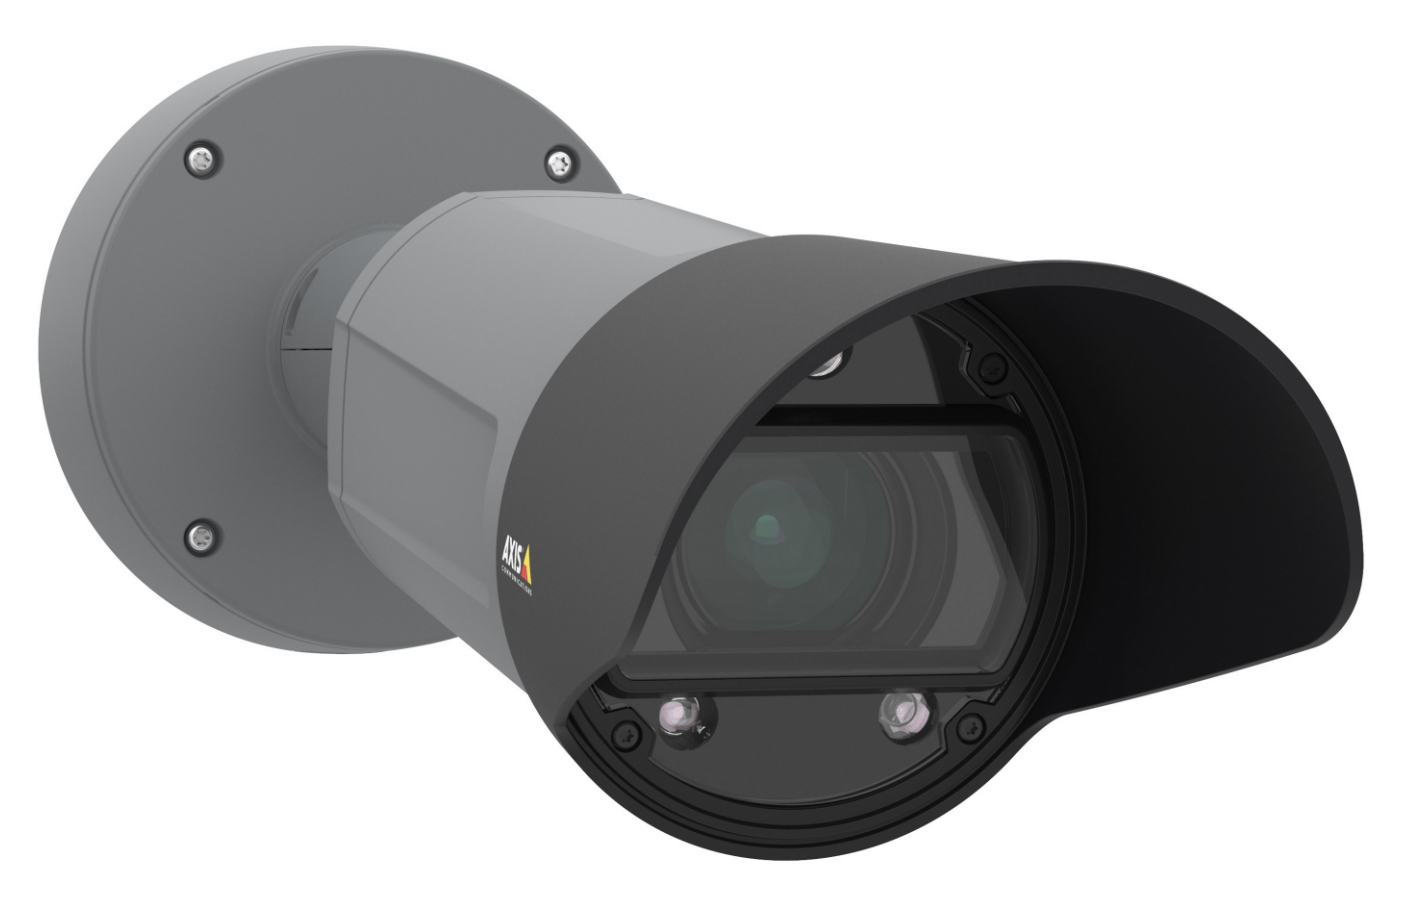 AXIS Q1700-LE License Plate Camera